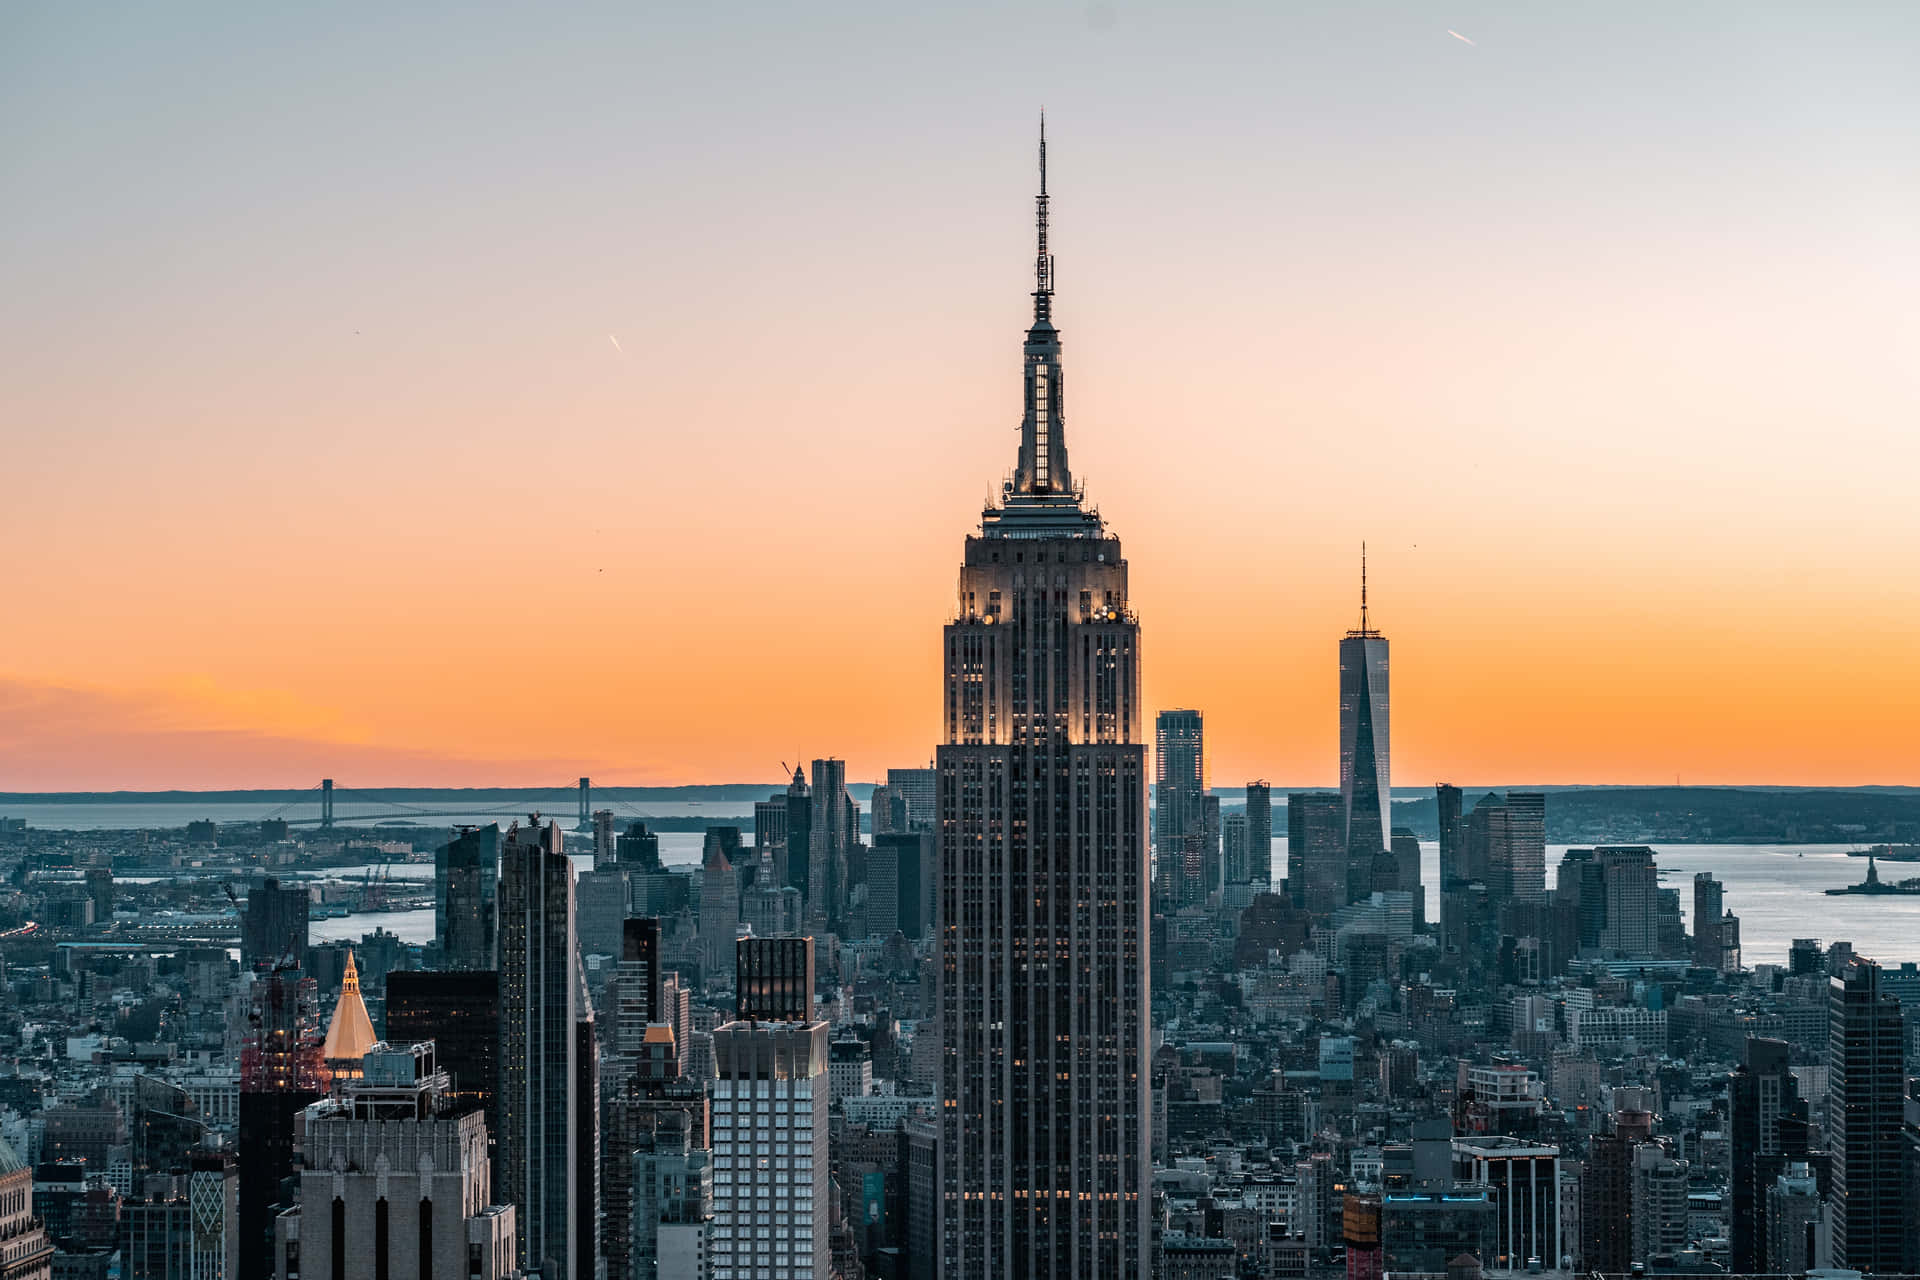 Manhattan at Daybreak - The Empire State Building in New York City